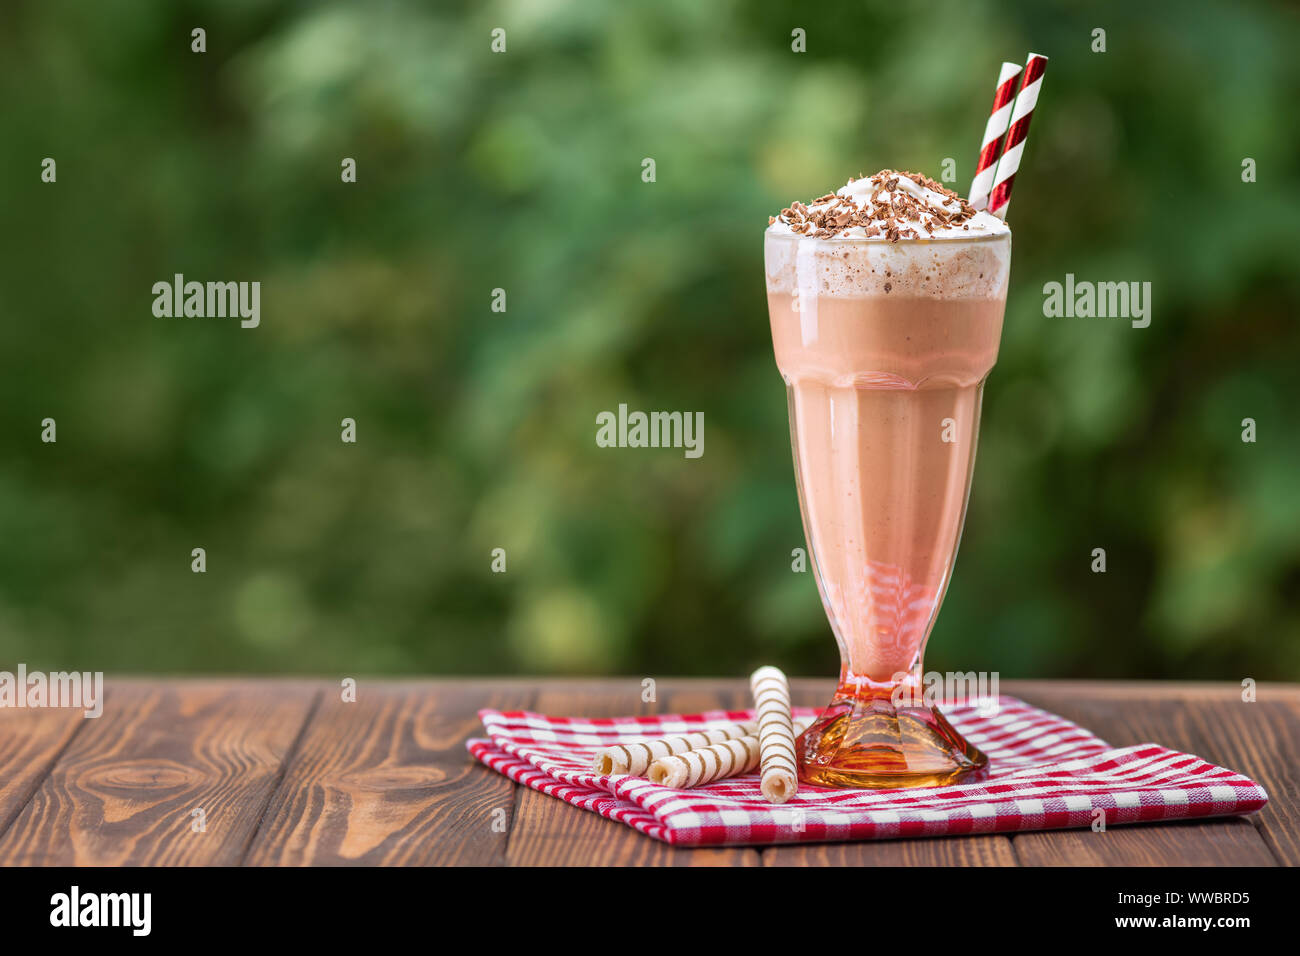 chocolate milkshake in glass with whipped cream and wafer rolls on wooden table outdoors Stock Photo